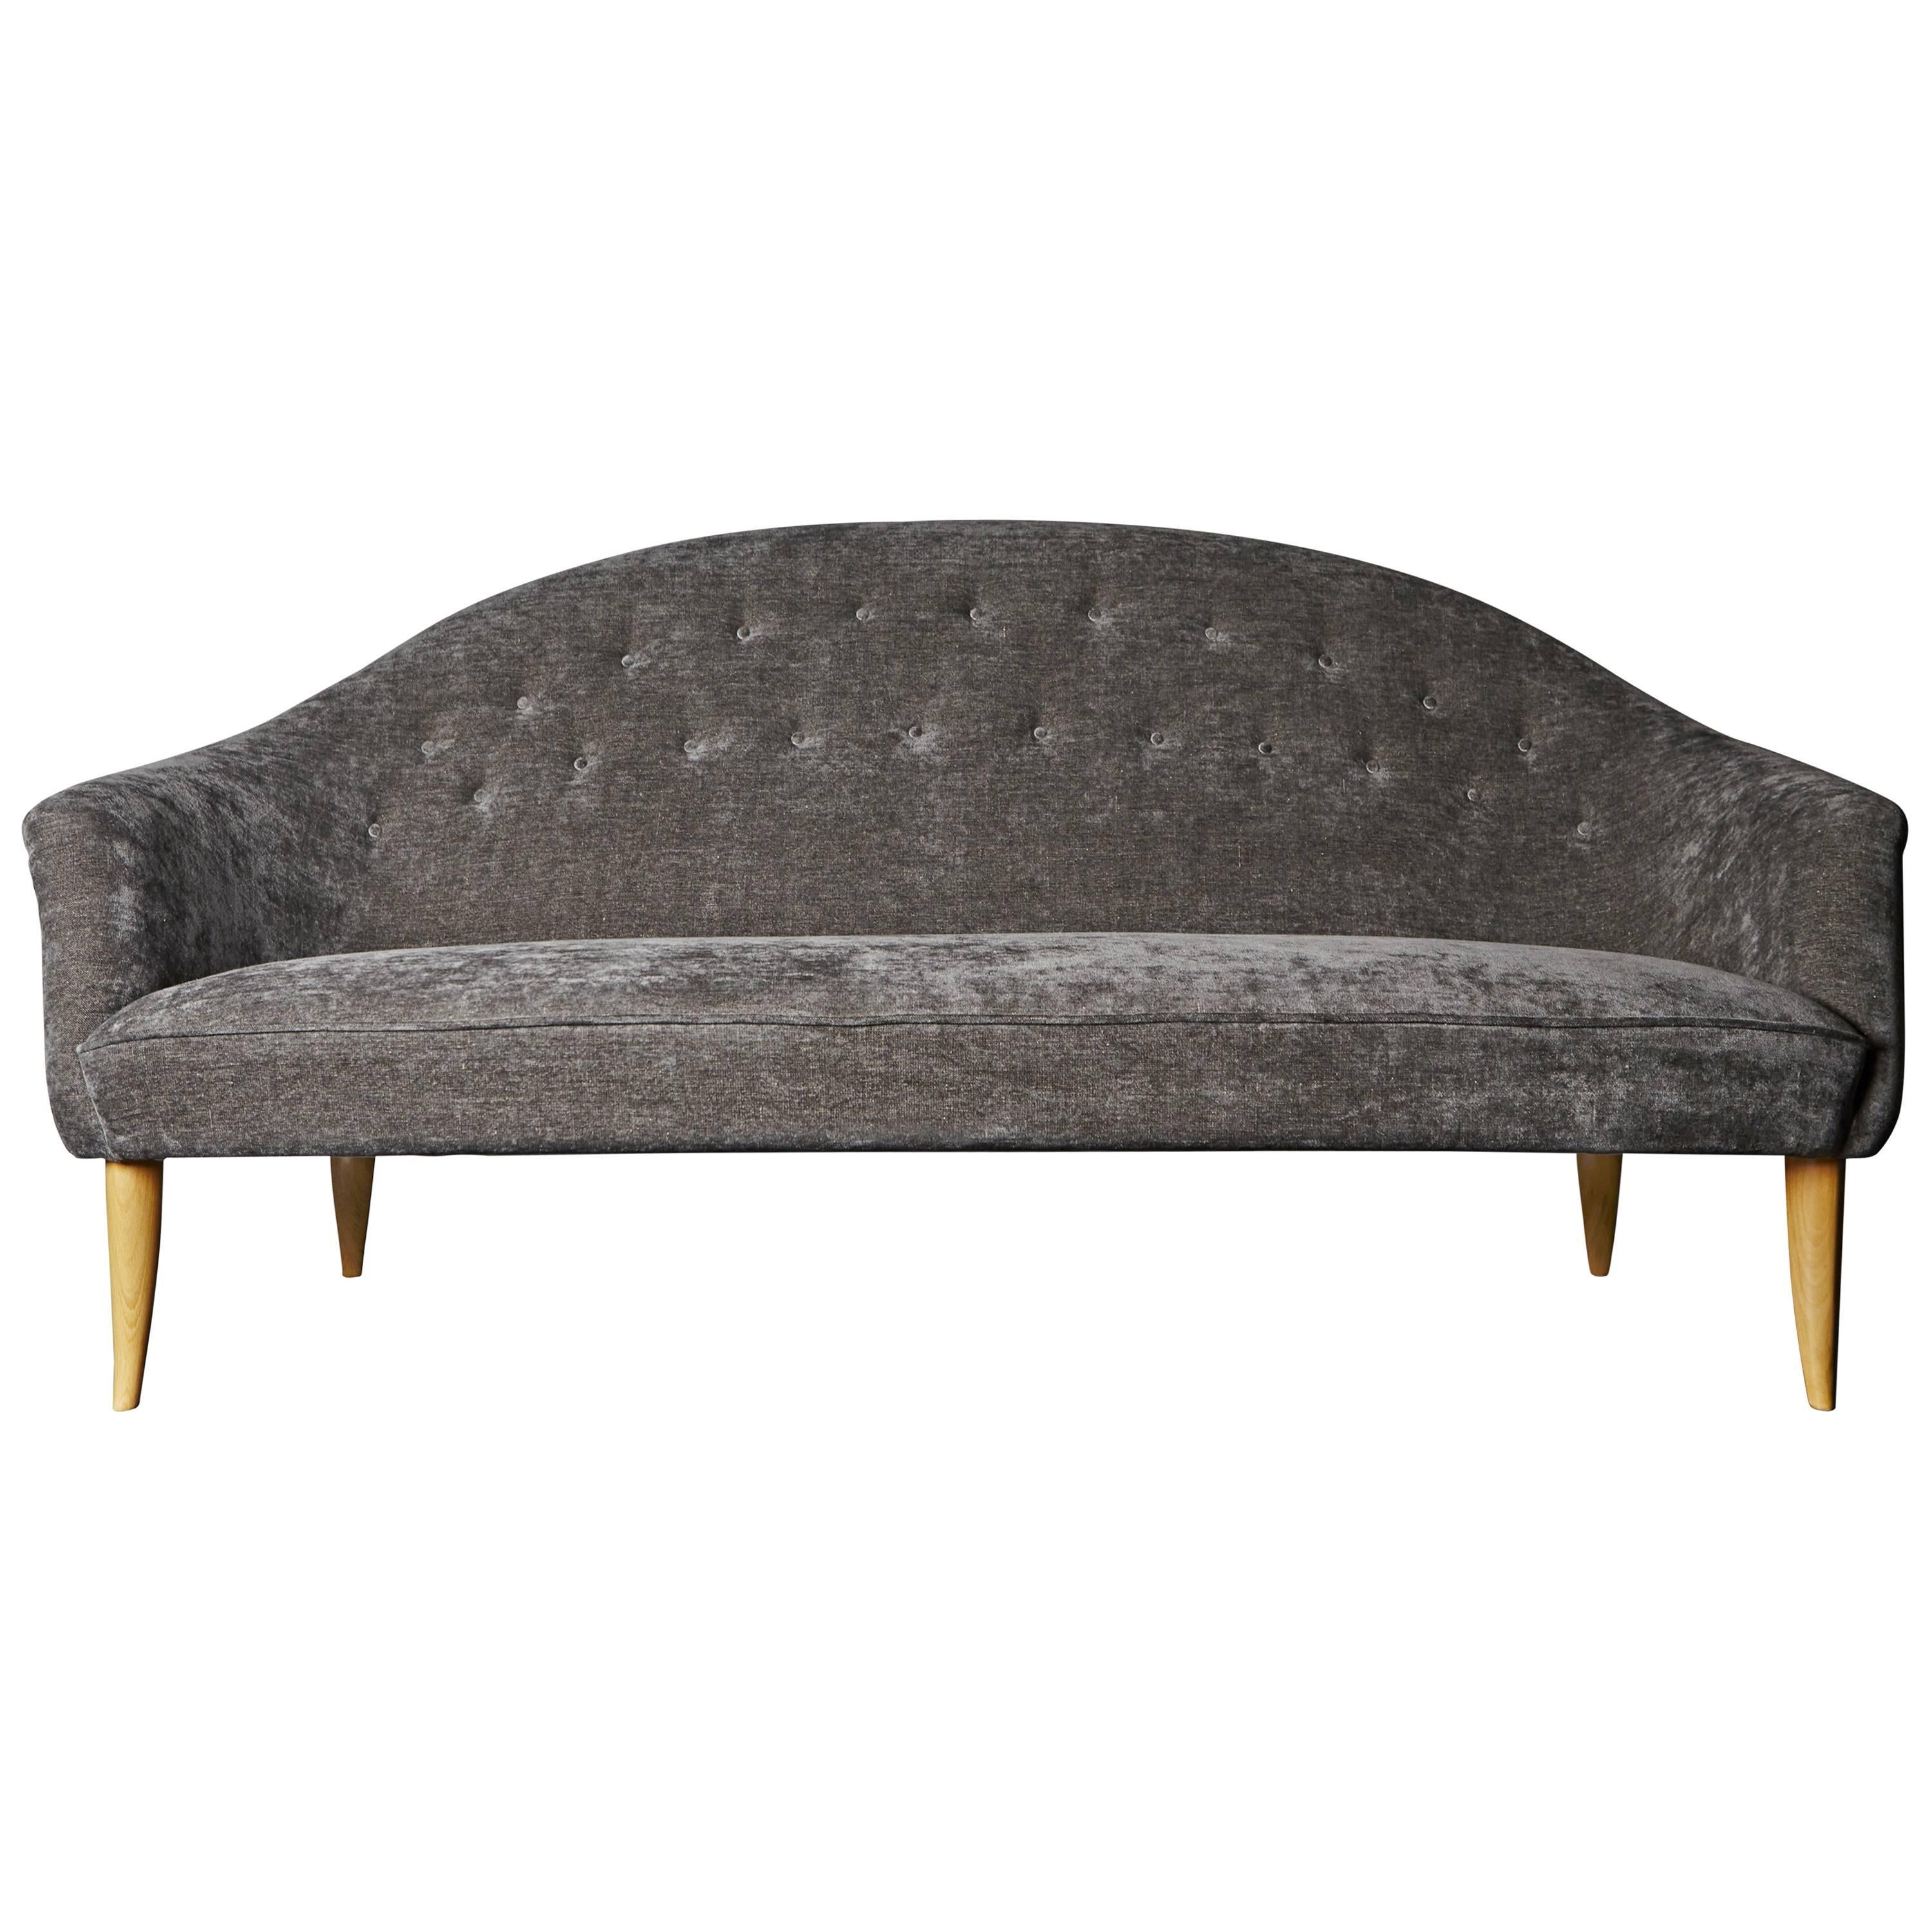 "Paradise" Sofa by Kerstin Hörlin Holmquist, circa 1956 For Sale